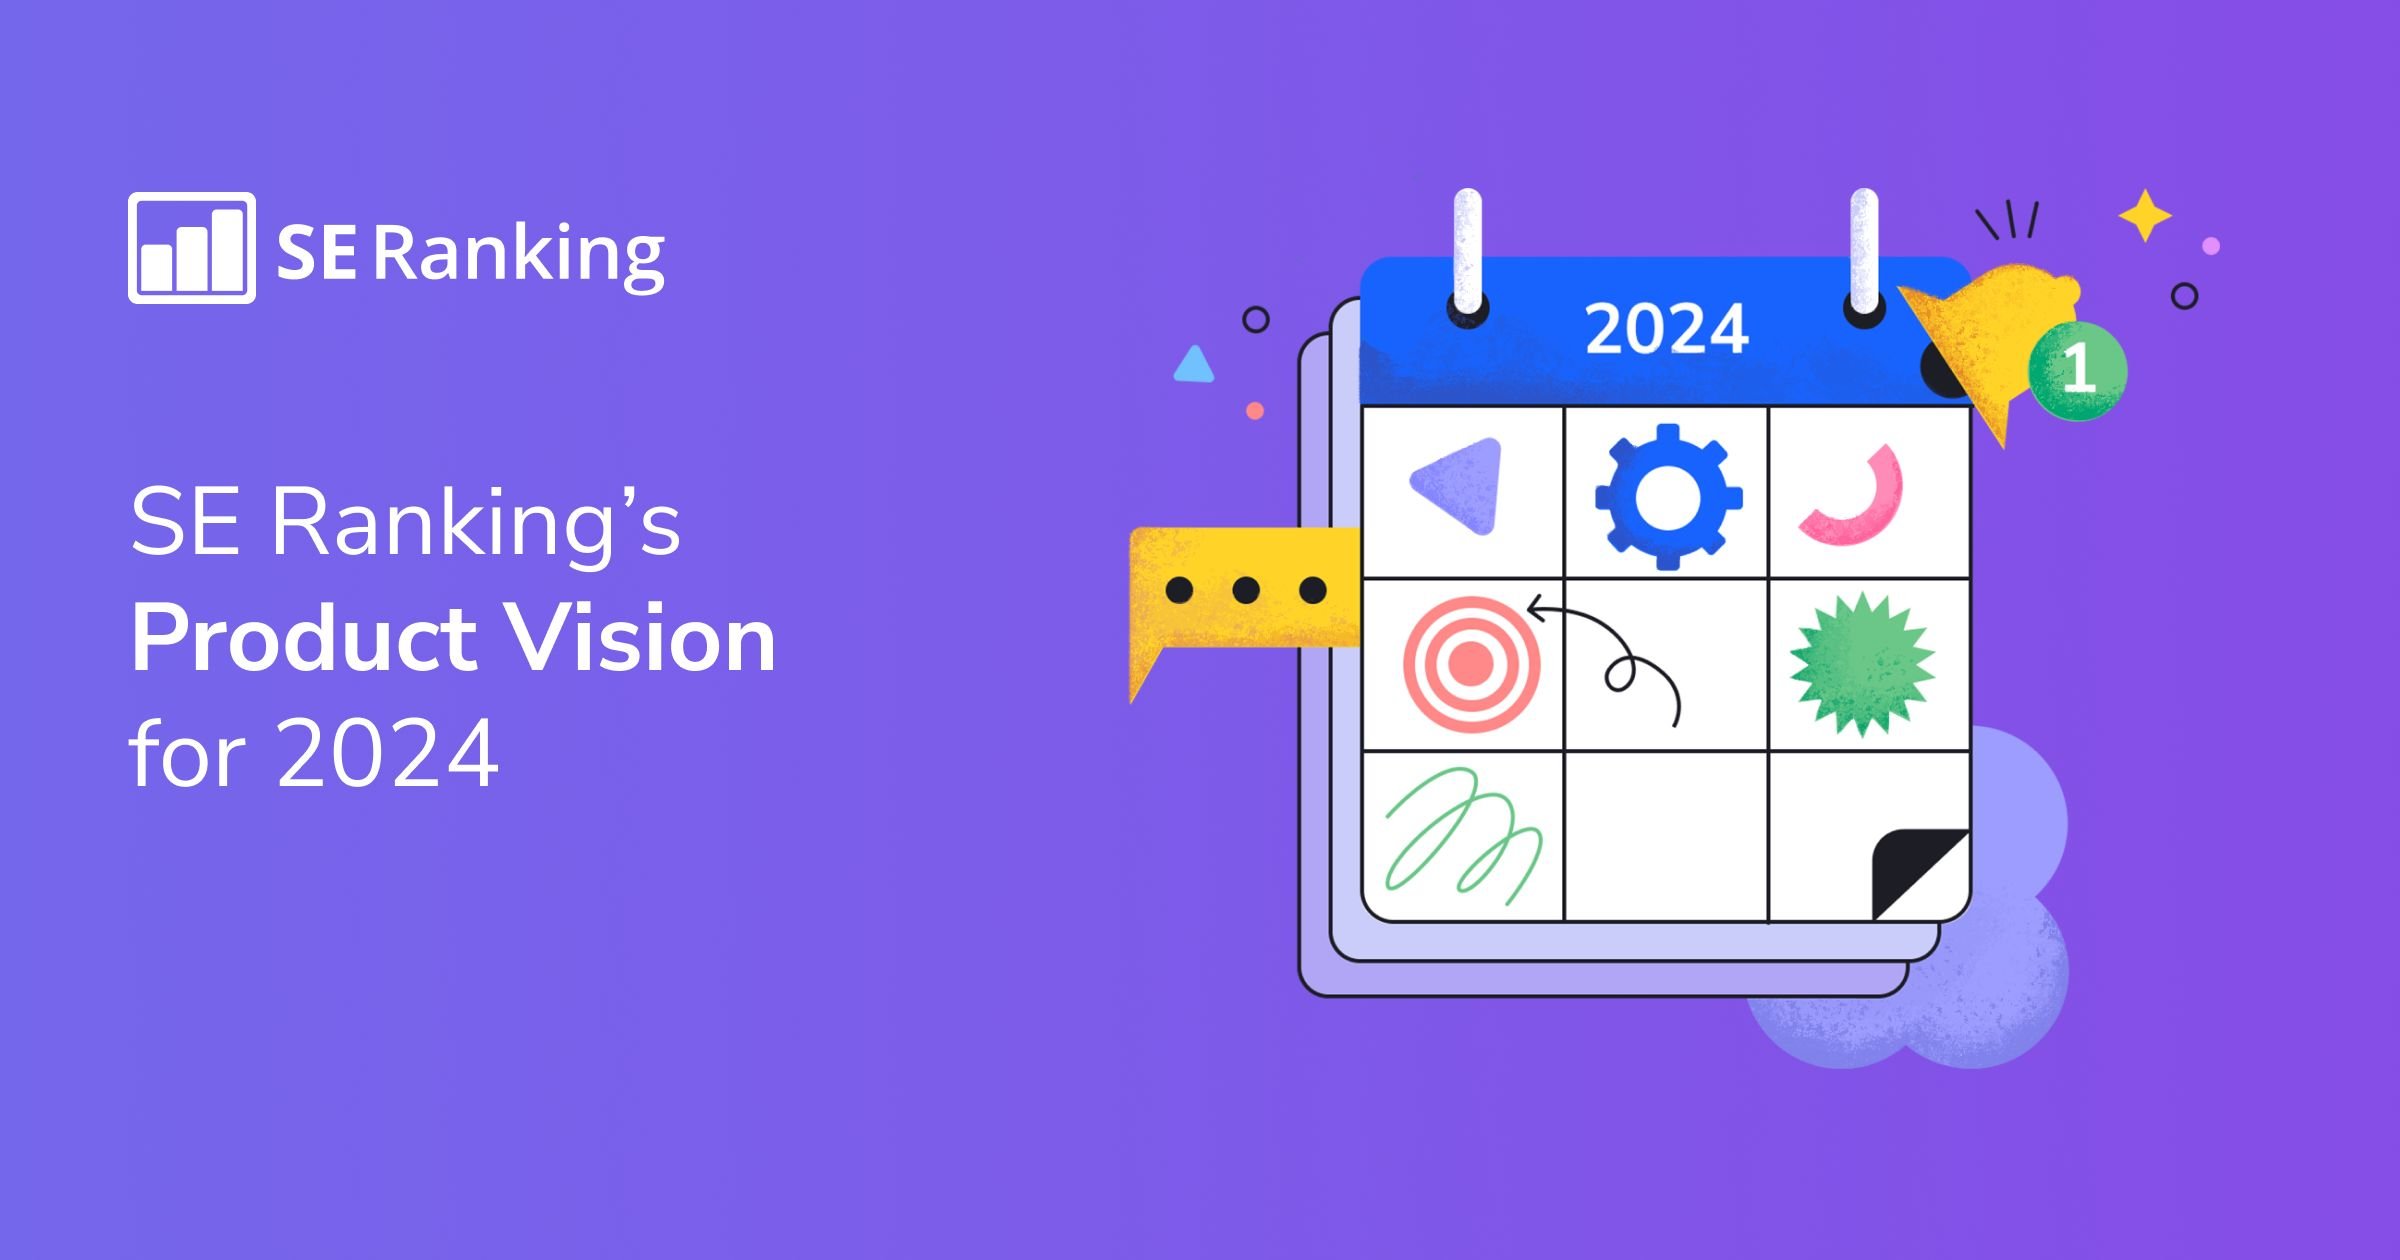 SE Ranking’s Product Vision for 2024